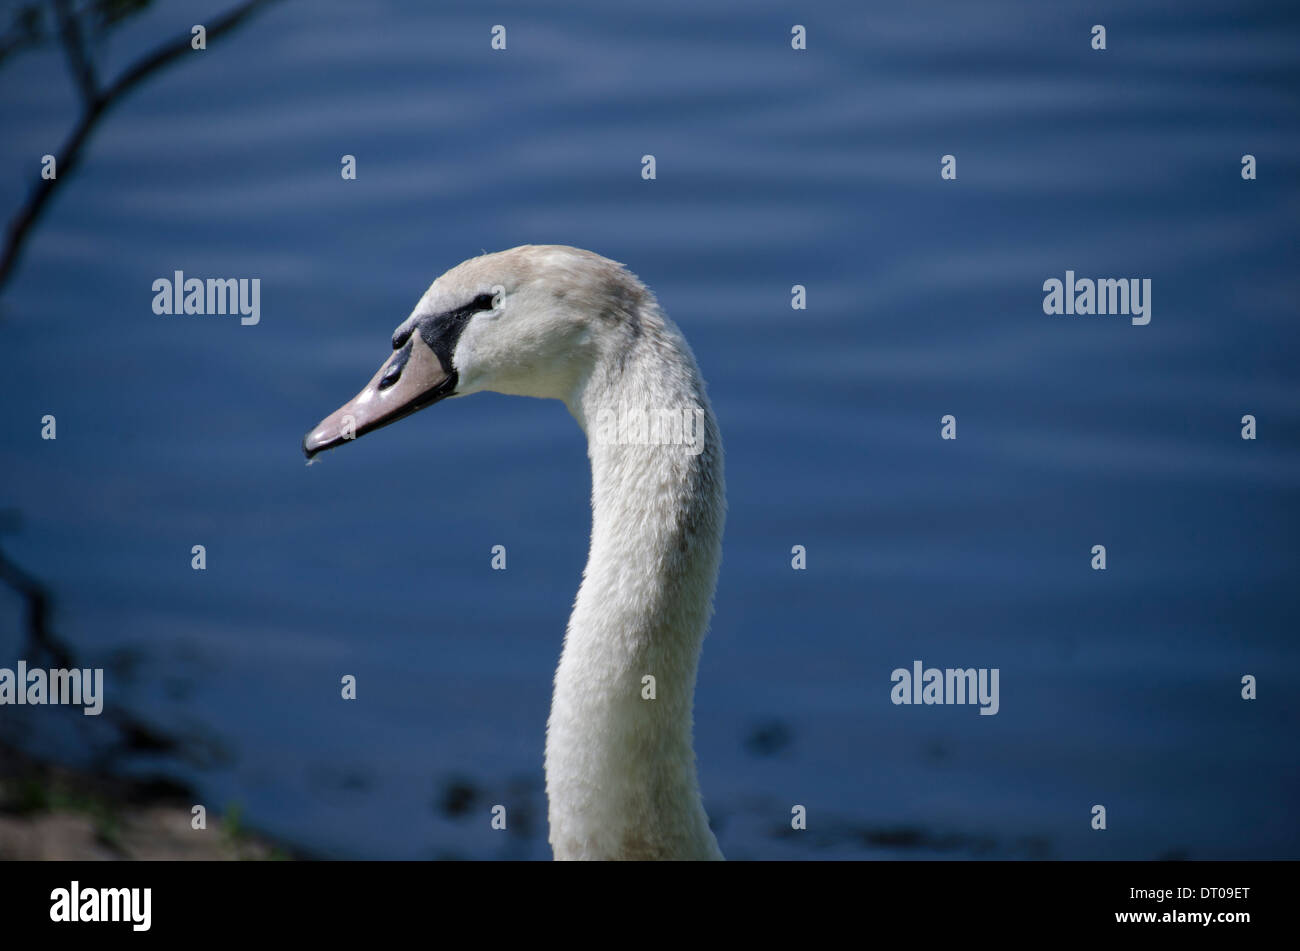 White swans head against blue water Stock Photo